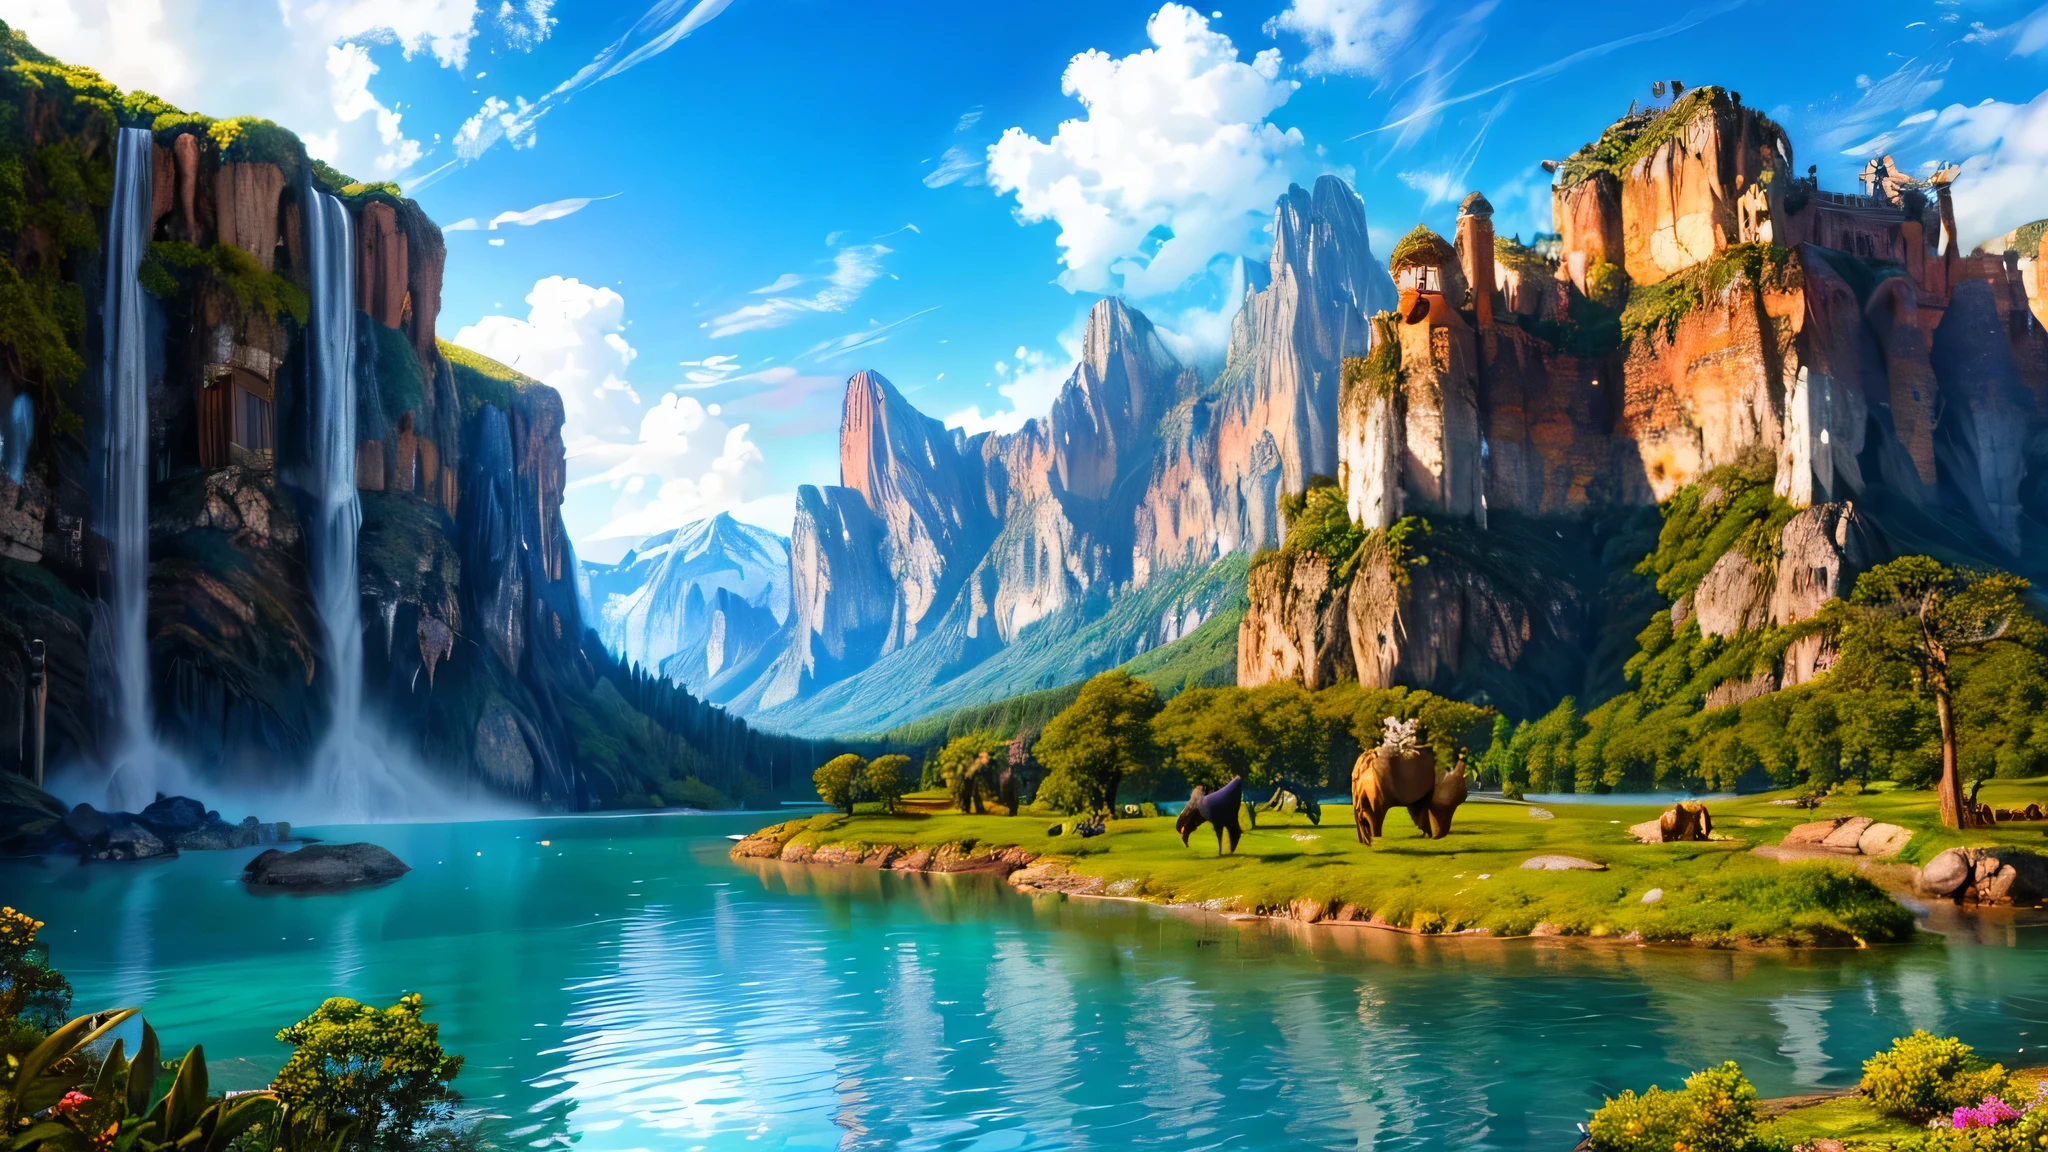 Vast and beautiful isekai world, filled with lush greenery and radiant skies, where the sun sets behind towering mountains, casting long shadows over the enchanted land. (Exotic creatures roam freely,) (The landscape is a breathtaking, colorful tableau,) (Detailed, intricate structures of ancient civilizations,) (Lost in its magic,) (Awe-inspiring, surreal sights abound,) (Majestic, mystical elementals,) (Serene, tranquil waters reflect the splendor) (Adventure awaits in this wondrous realm,) (Vibrant and full of life,)